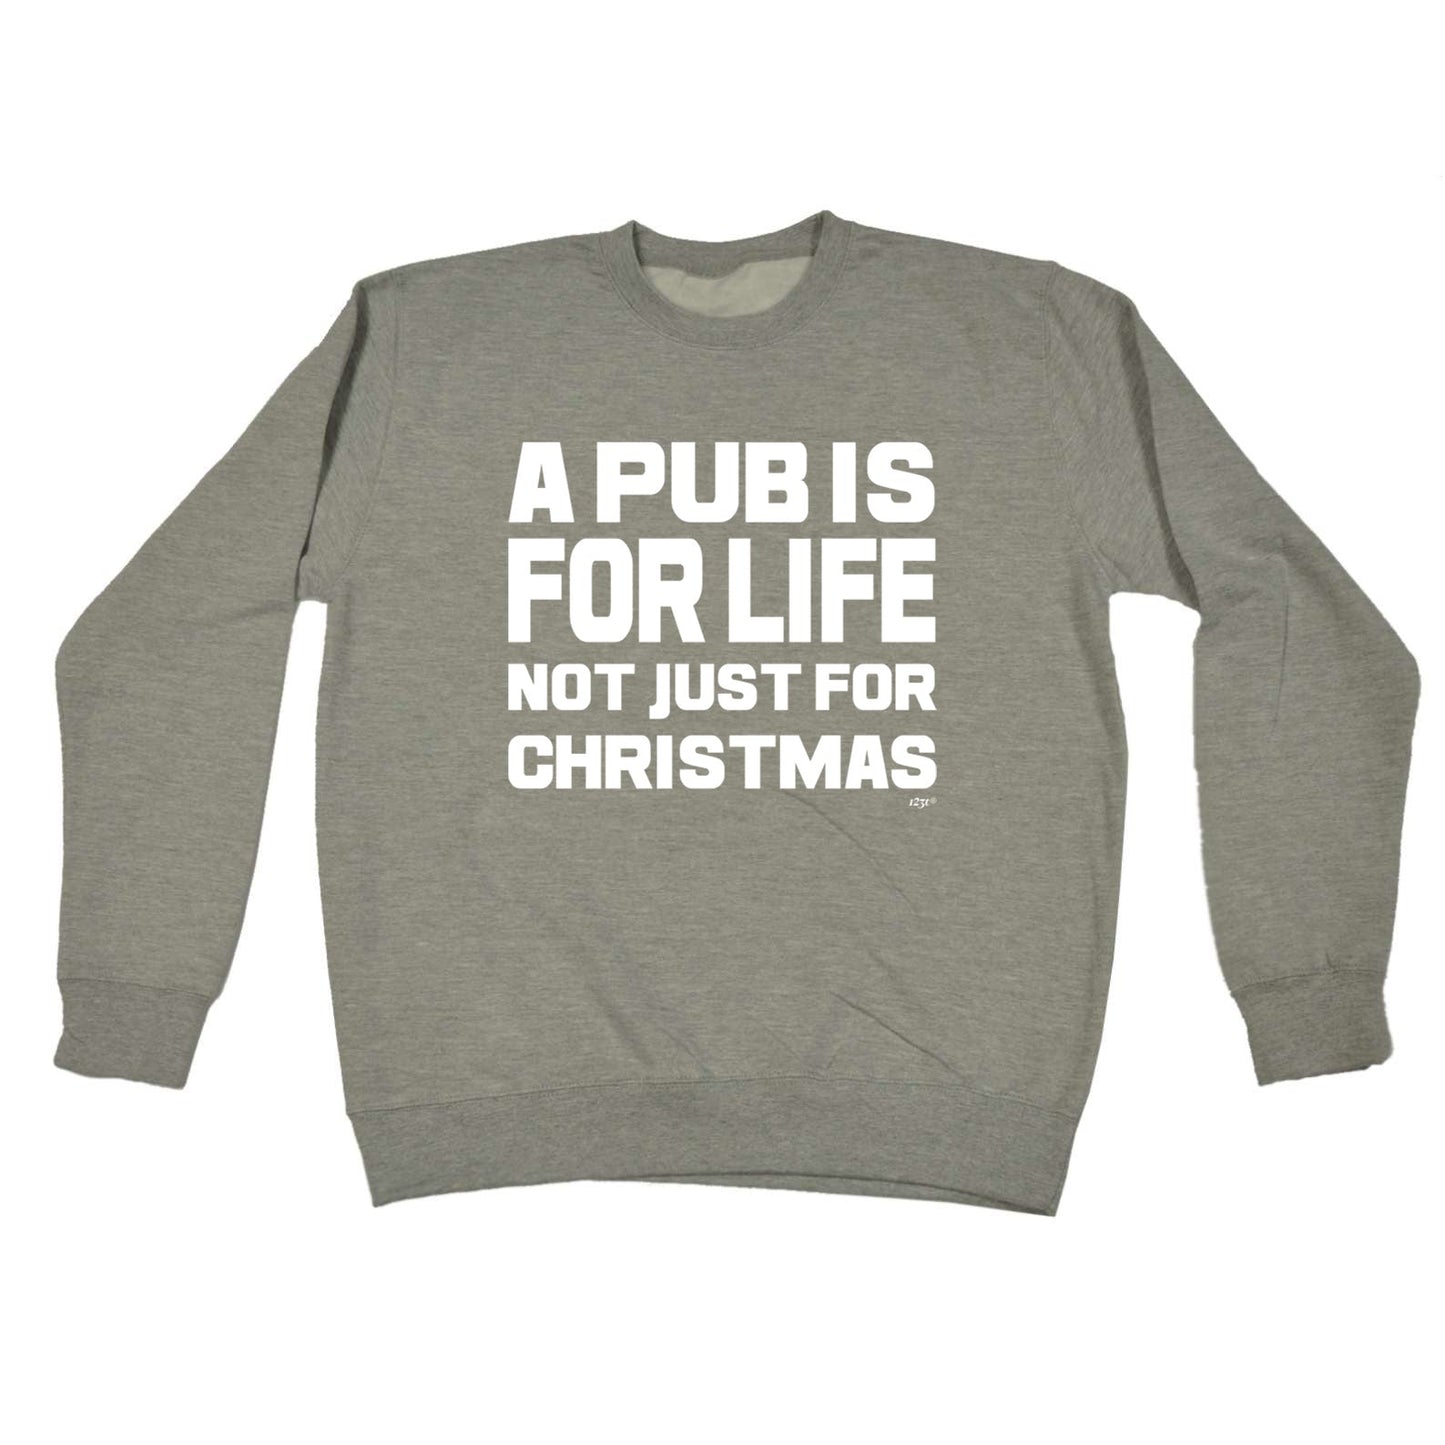 A Pub Is For Life Not Just For Christmas - Xmas Novelty Sweatshirt